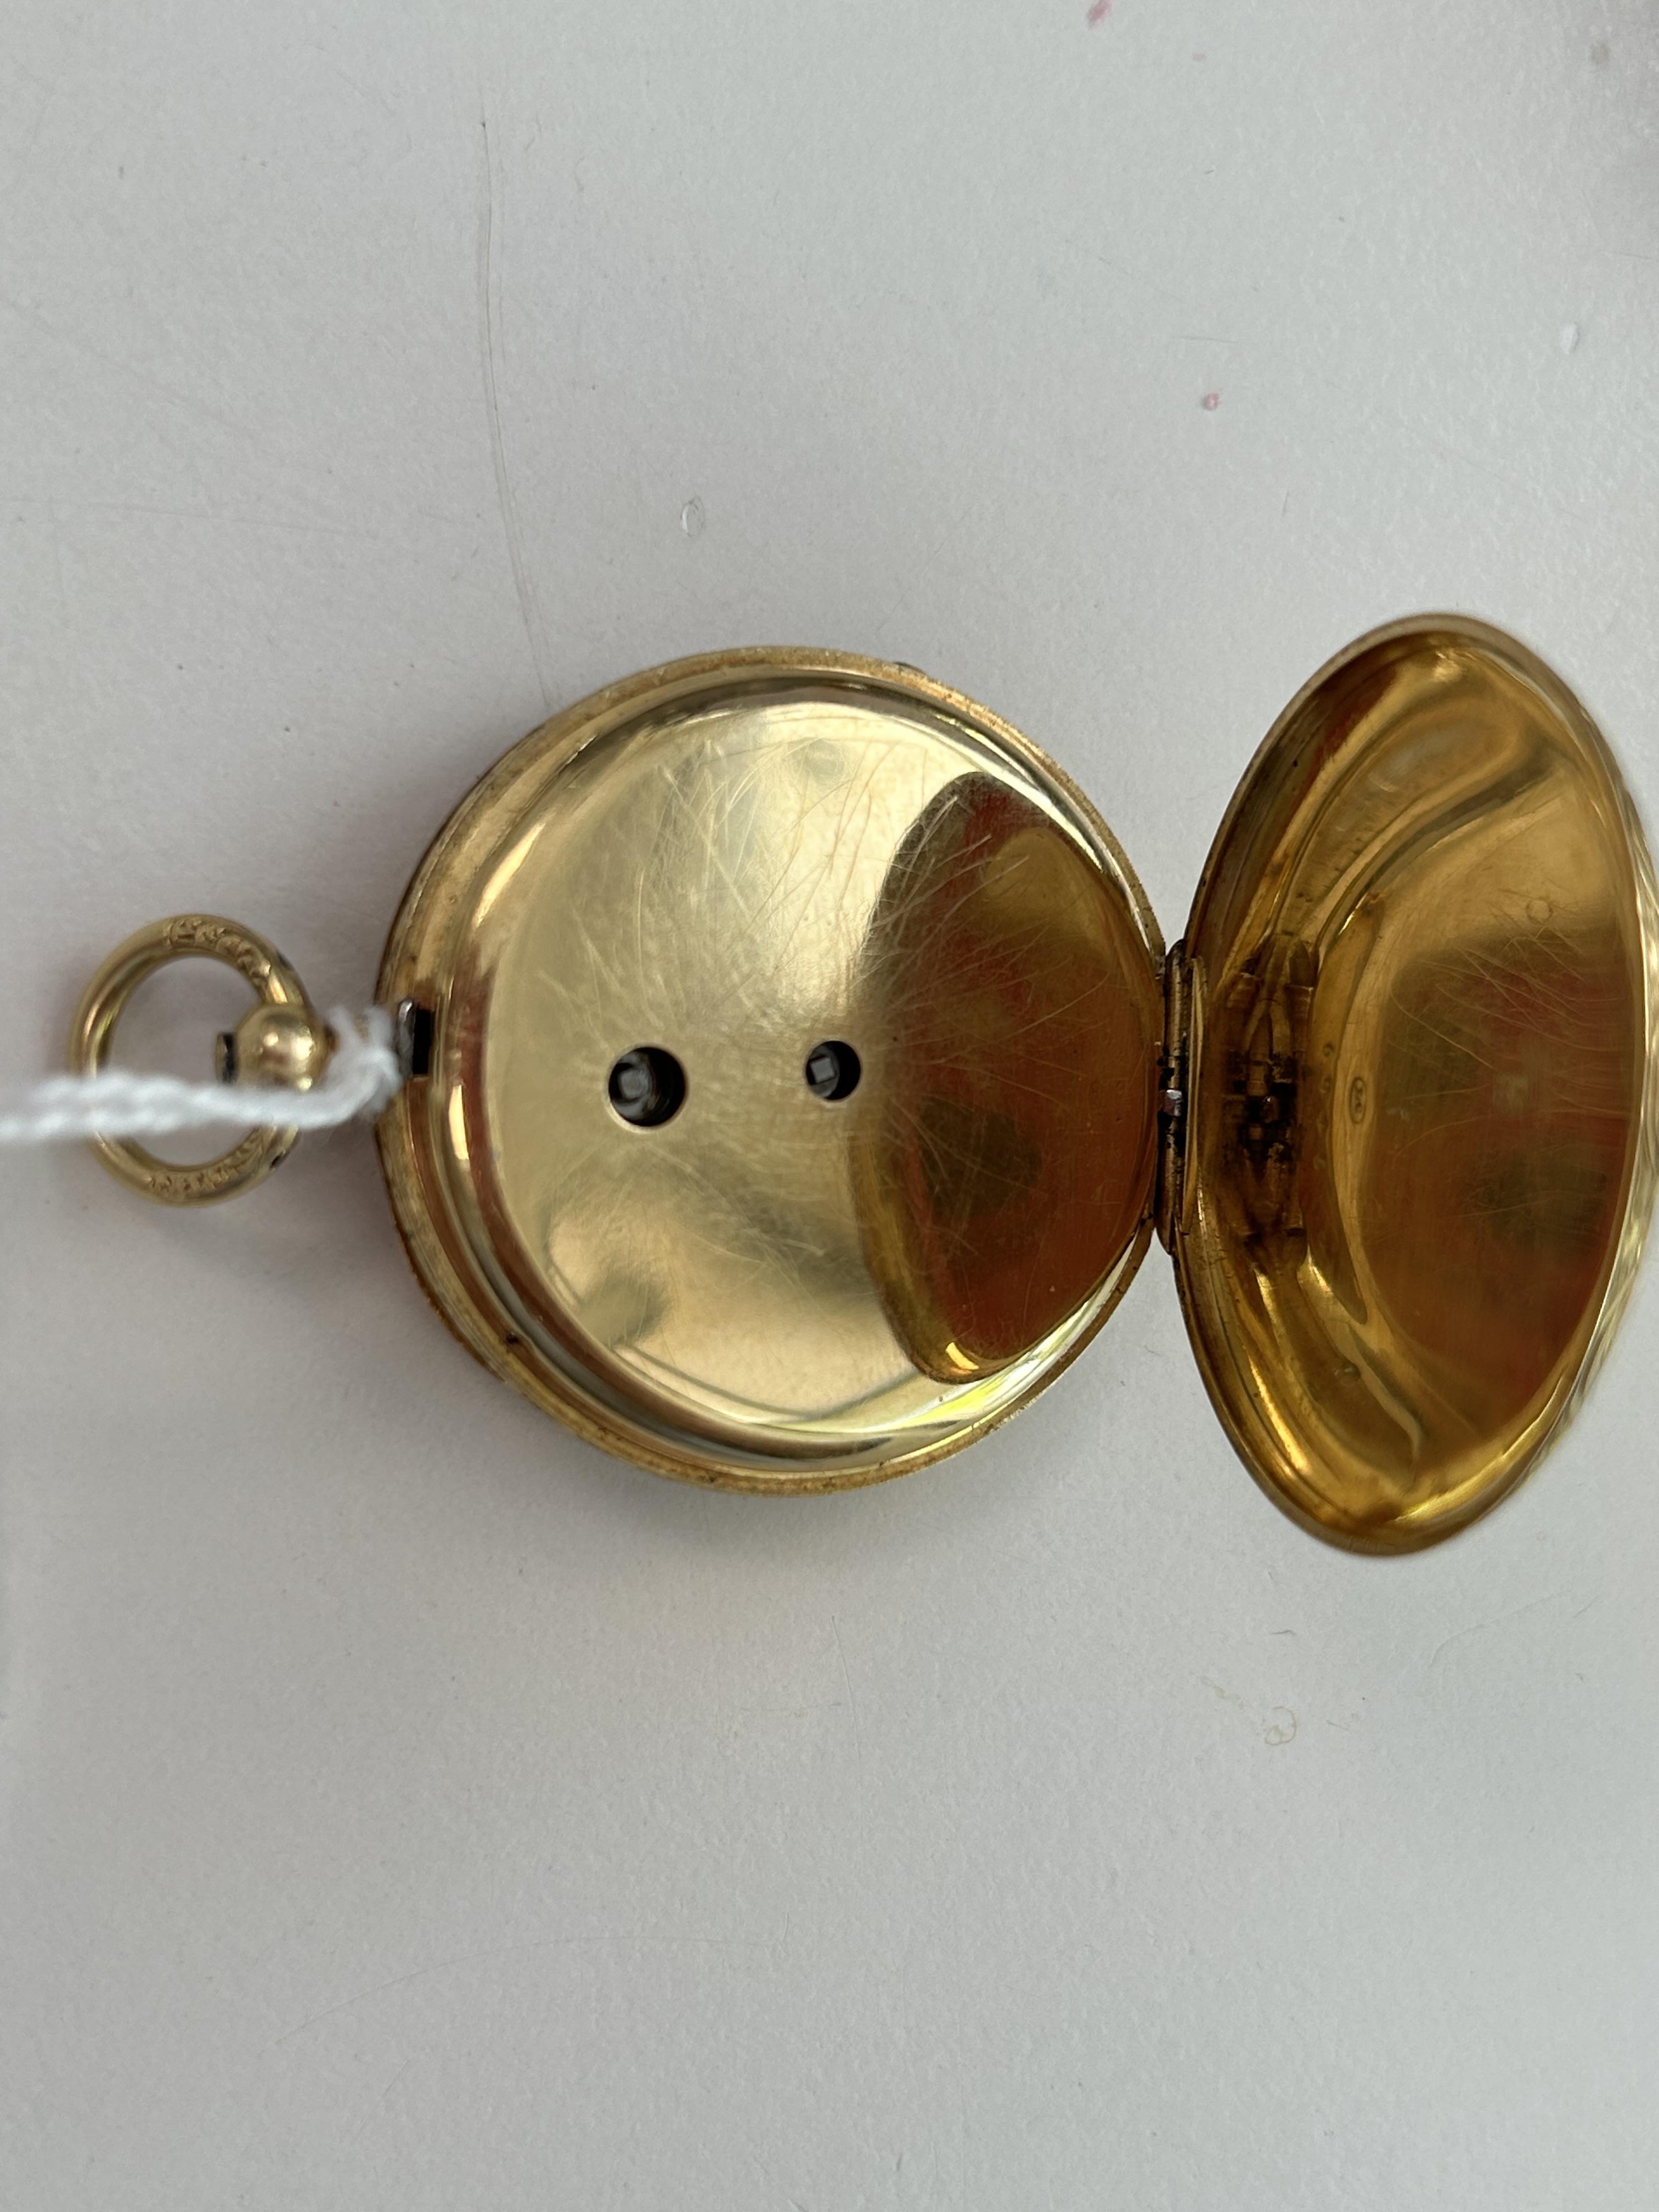 18K open open faced faced pocket watch - Image 4 of 4